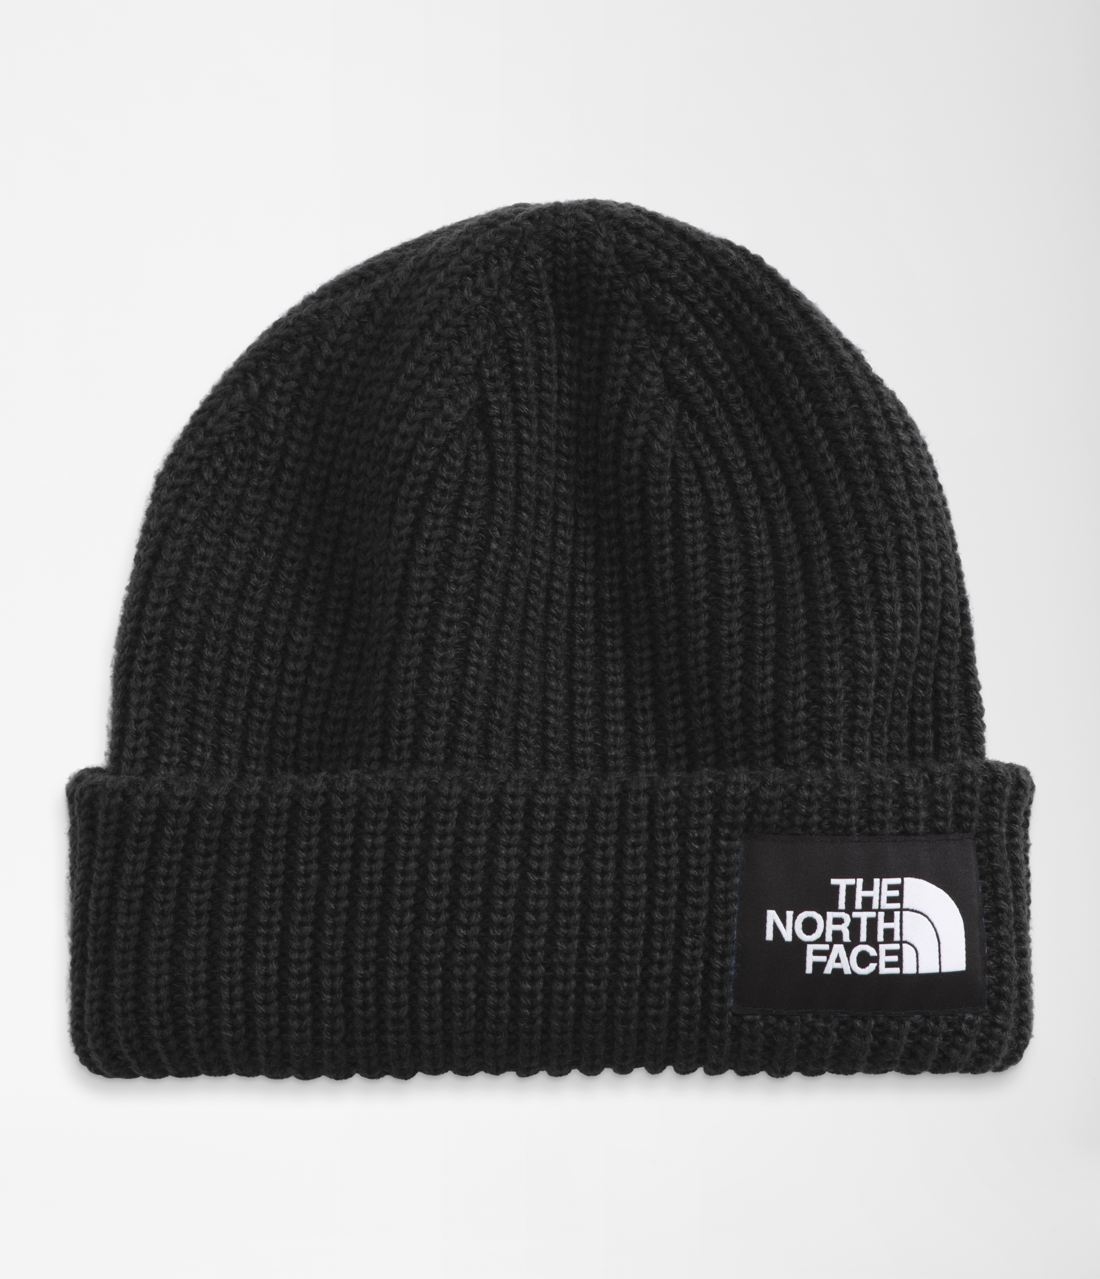 The North Face Kids' Salty Dog Beanie